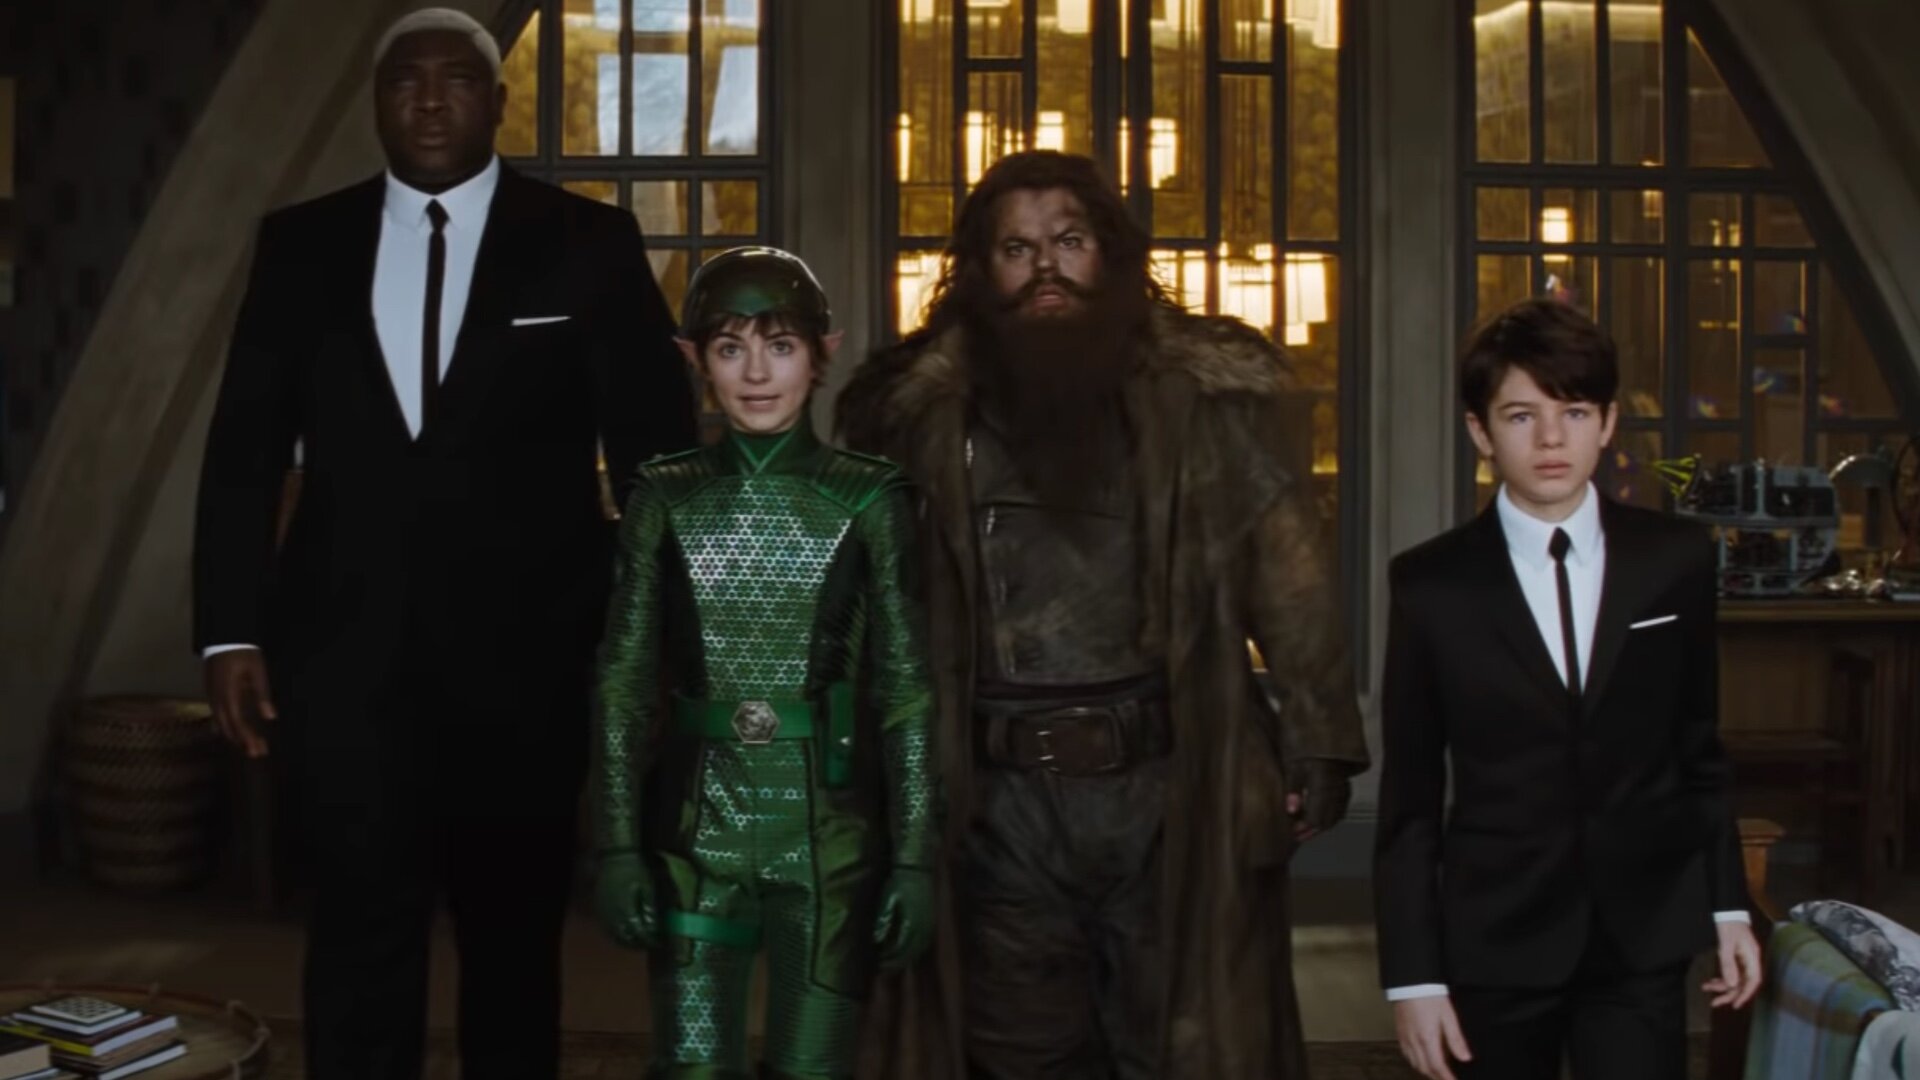 Disney Pulls 'Artemis Fowl' From Theatrical Release, Will Debut on Disney+  - TheWrap